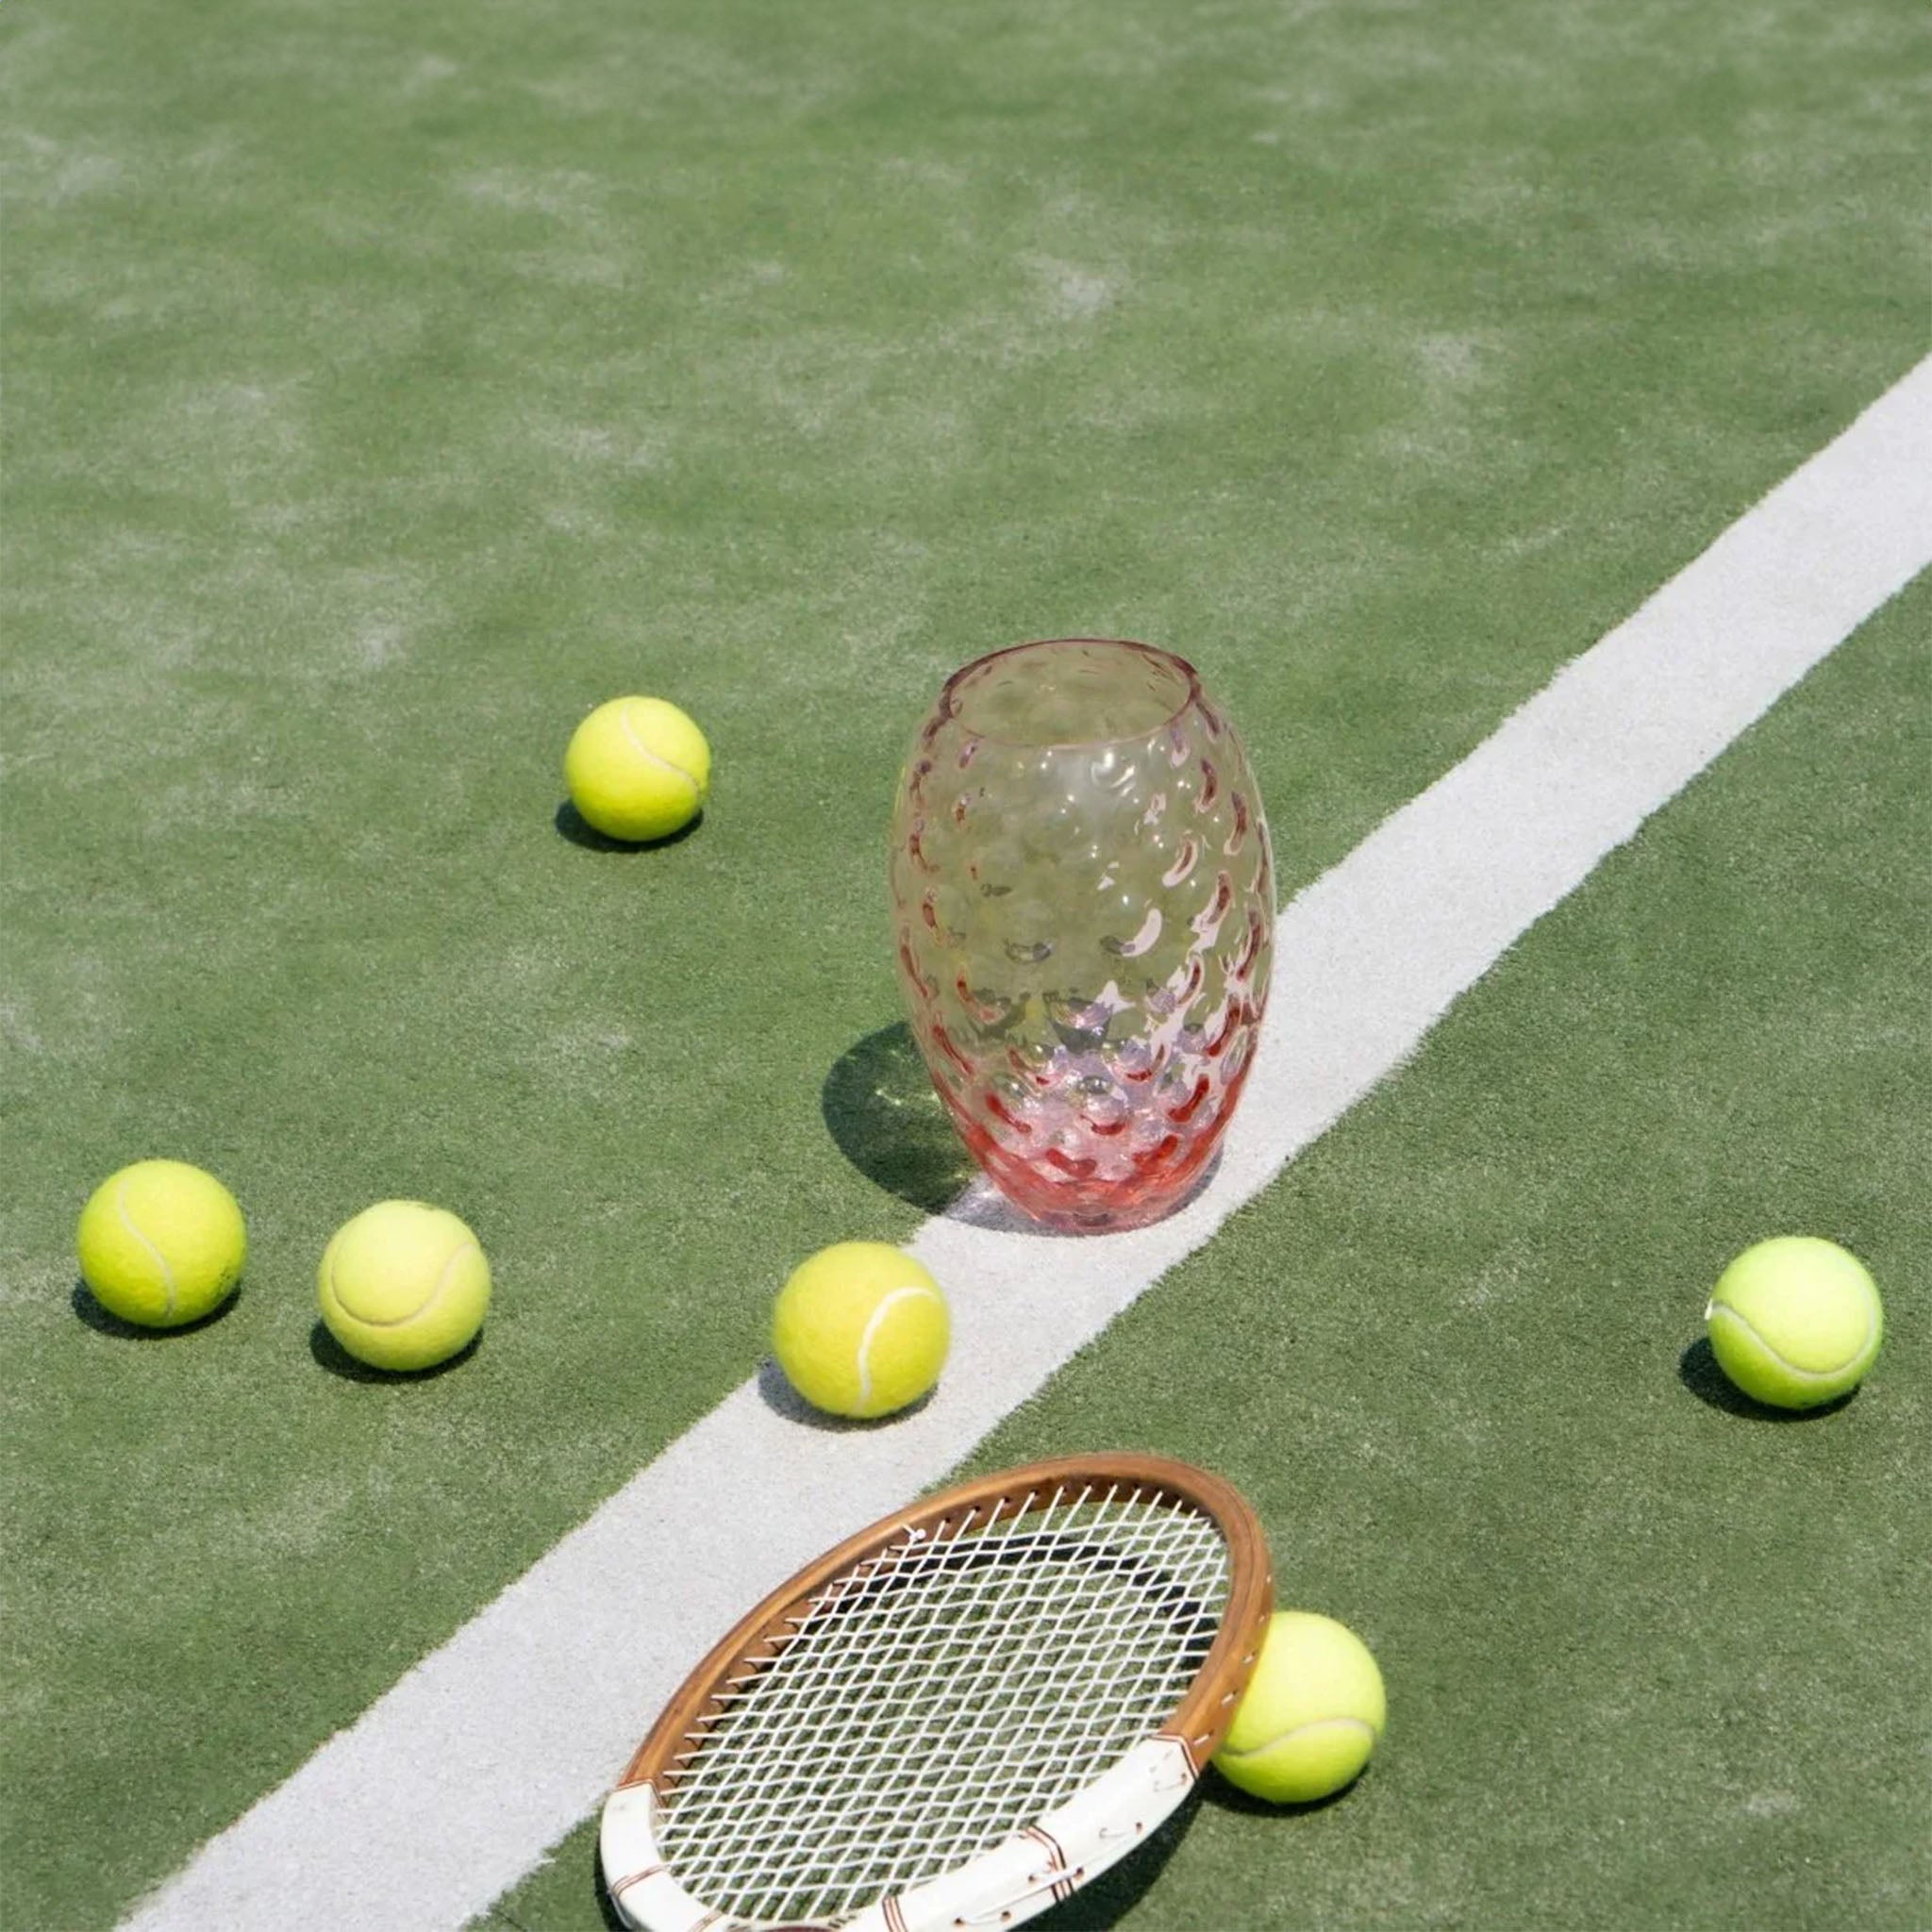 a tennis racket, balls, and pink vase on a tennis court